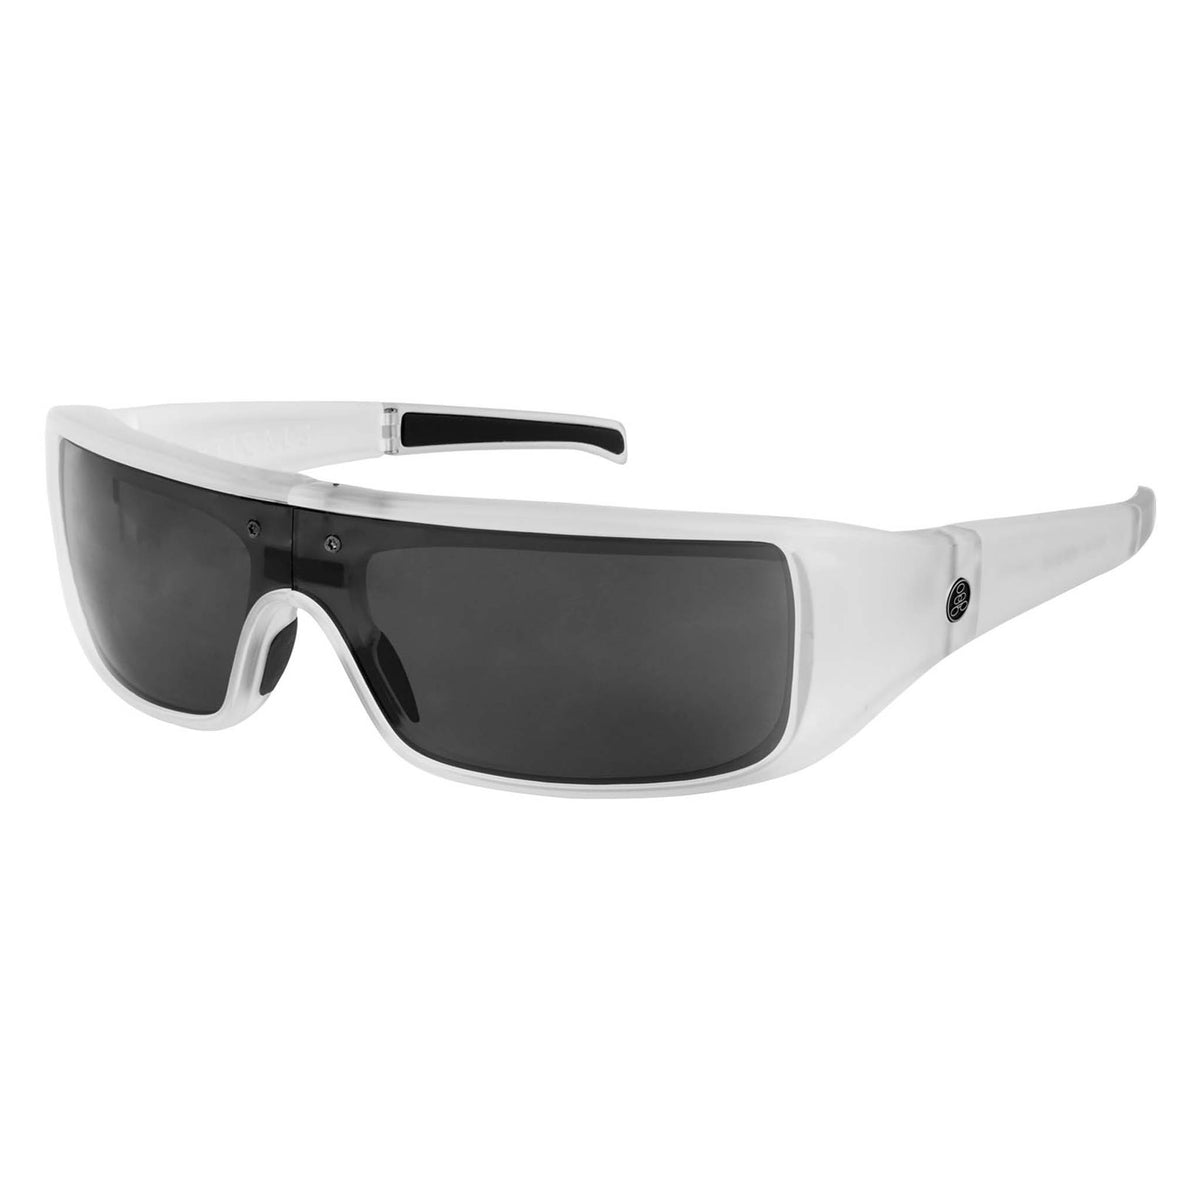 Popticals, Premium Compact Sunglasses, PopGear, 010050-XYOO, Polarized Sunglasses, Matte Crystal Frame, Gray Lenses, Glam View